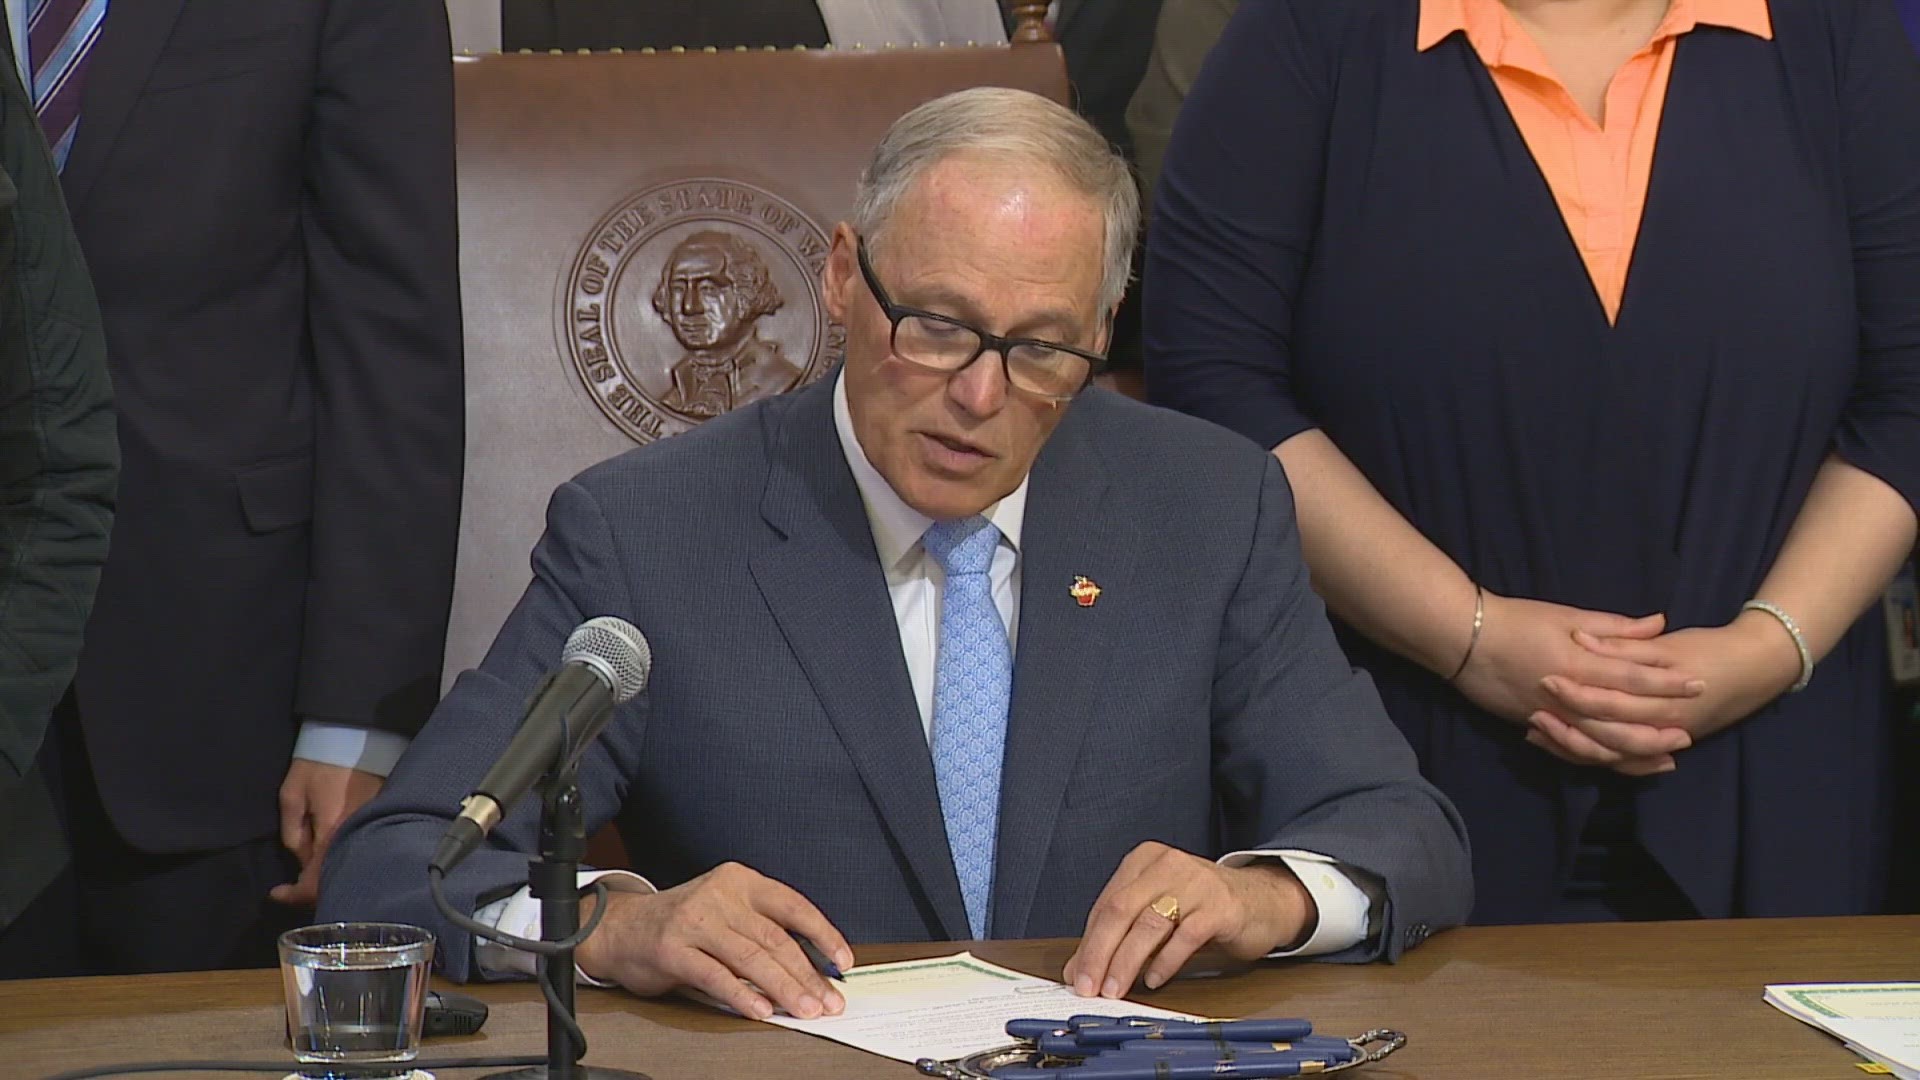 After years of restrictions and legal maneuvers preventing executions, Inslee signed a full ban into effect Thursday.